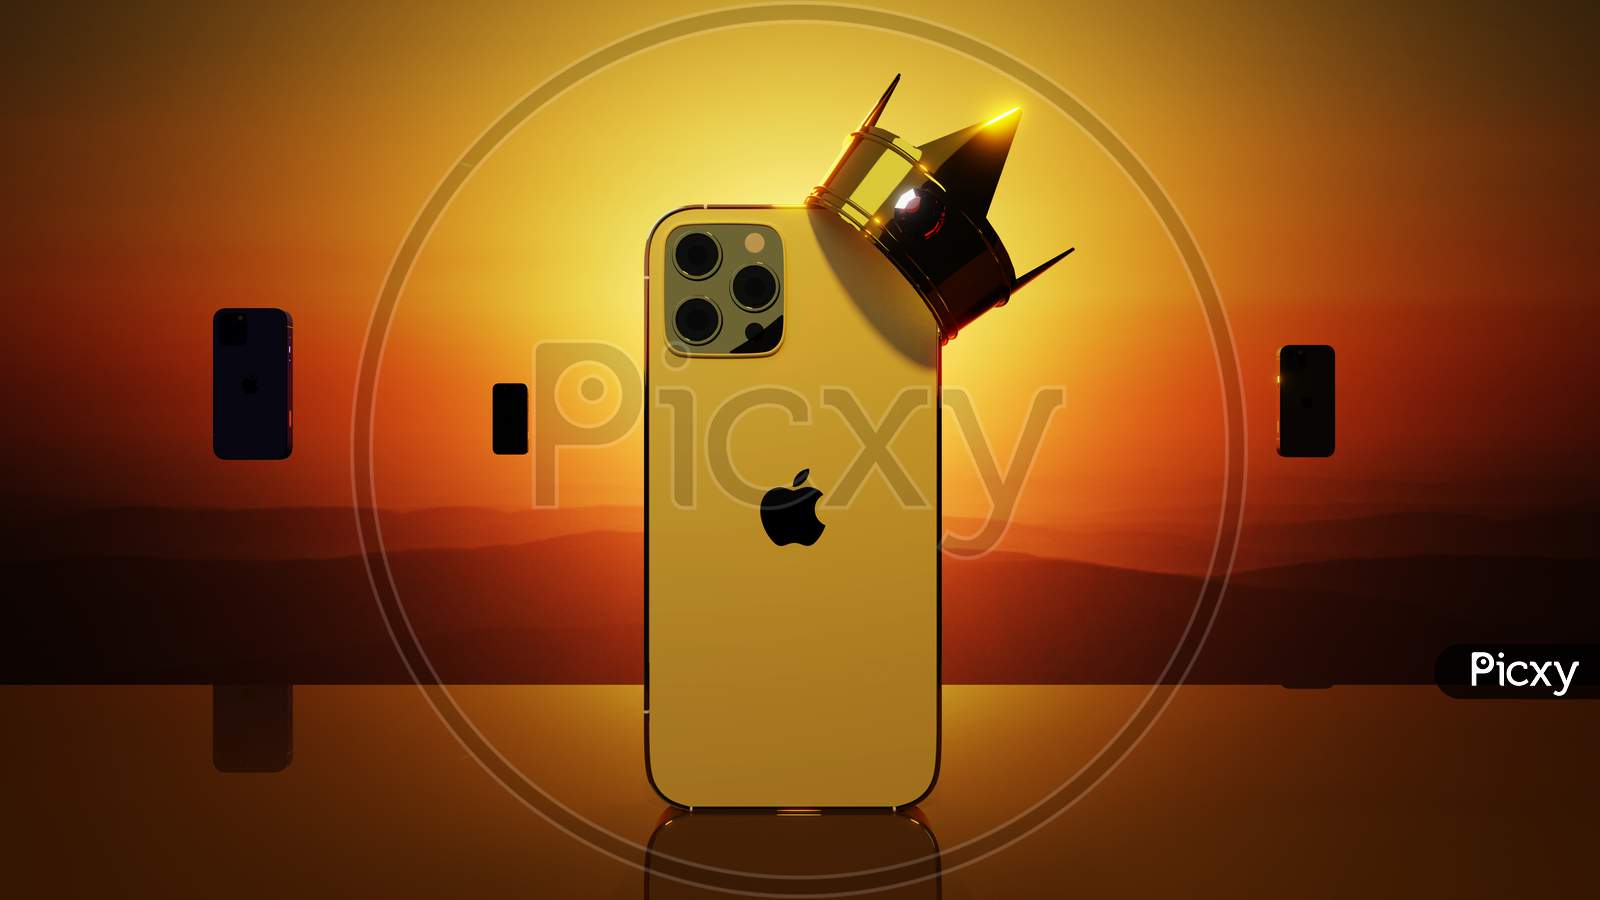 3D Rendering Of An Iphone 12 Pro Max Wearing A Crown Against A Sunset